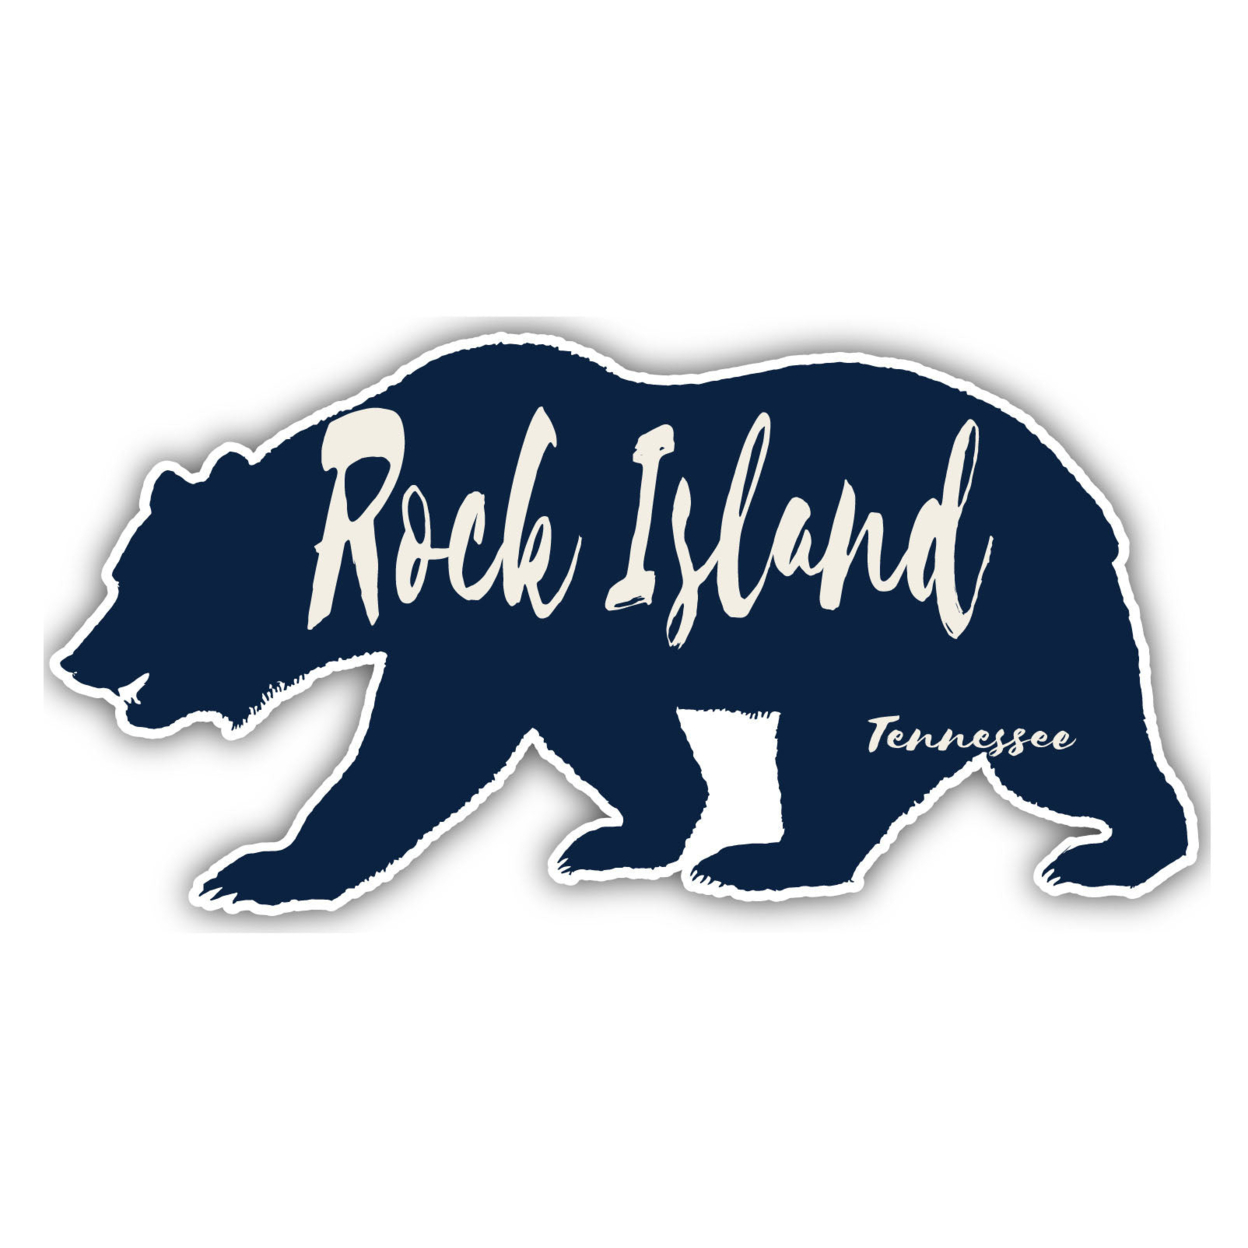 Rock Island Tennessee Souvenir Decorative Stickers (Choose Theme And Size) - Single Unit, 2-Inch, Bear